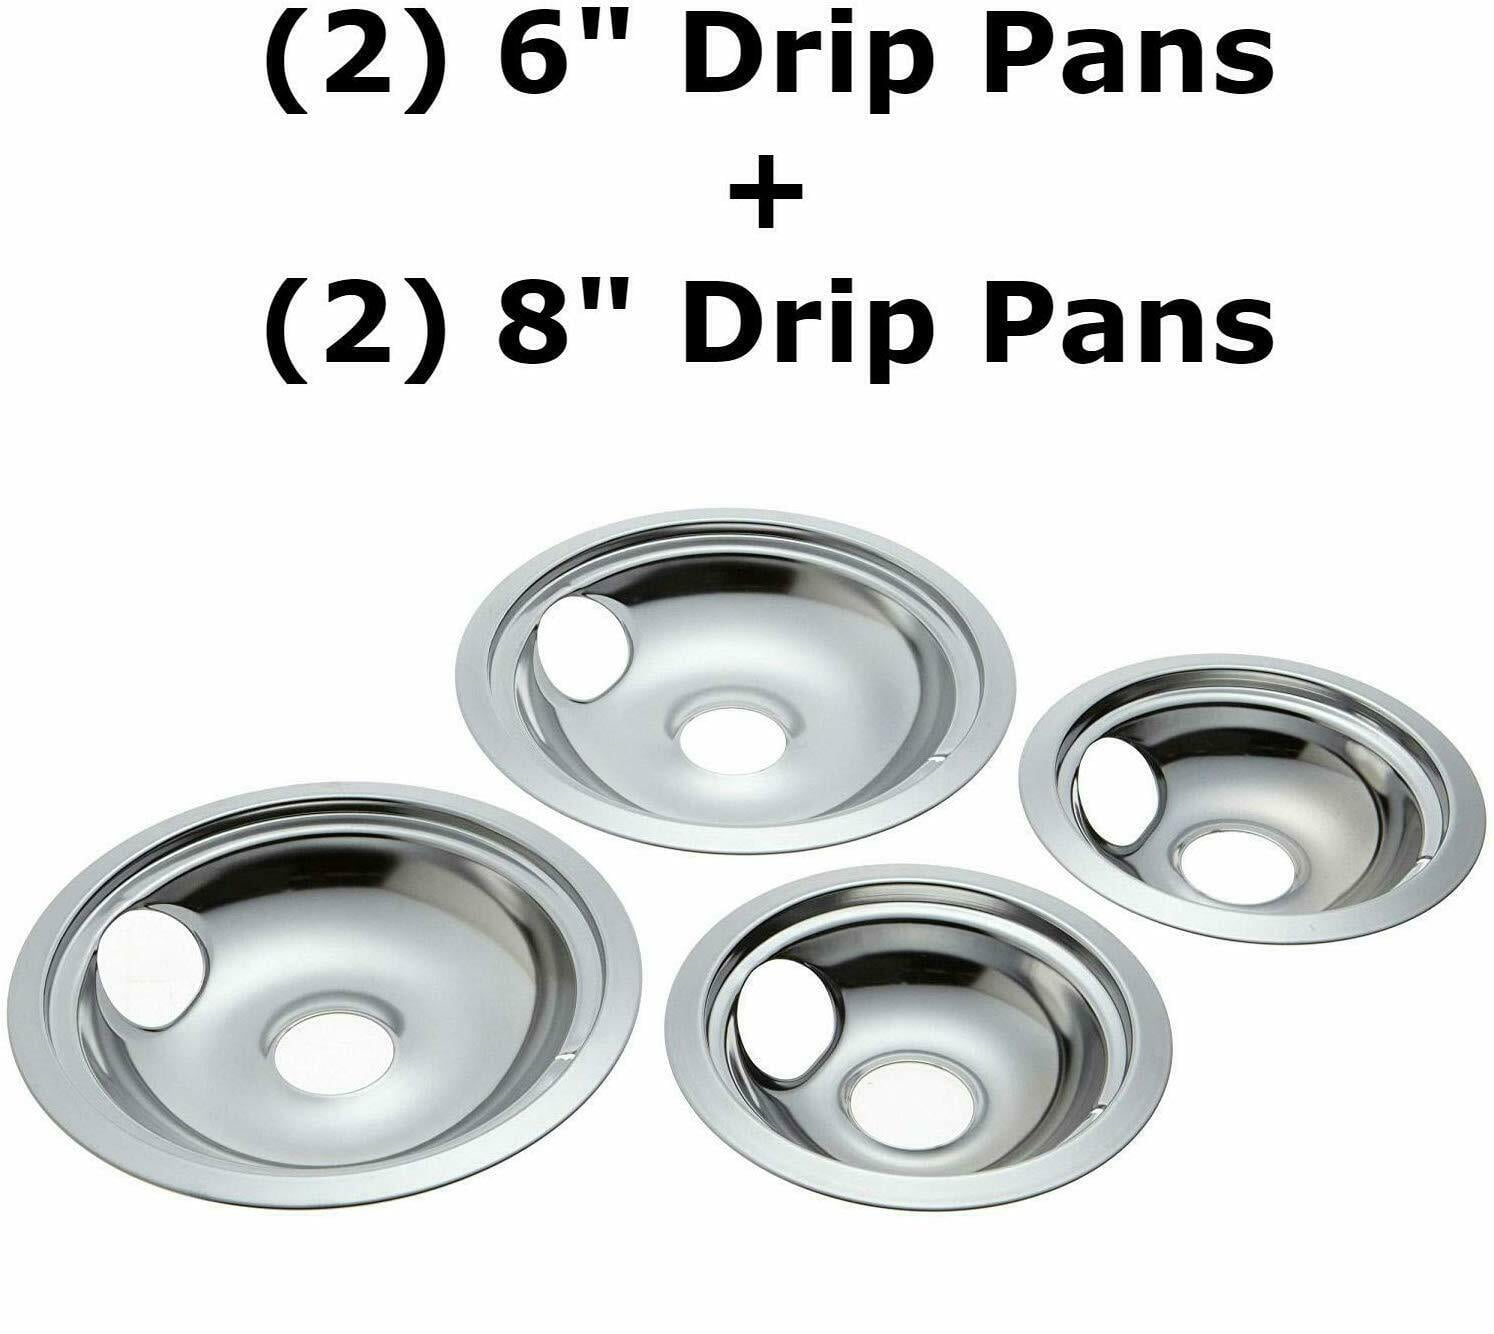 4 Pack Chrome Drip Pans Compatible with Whirpool Kenmore Frigirate Stove Top Drip Bowls Include 2 Pcs 6'' Range Replacement Drip Pans and 2 Pcs 8 '' Cooktop Drip Pans 